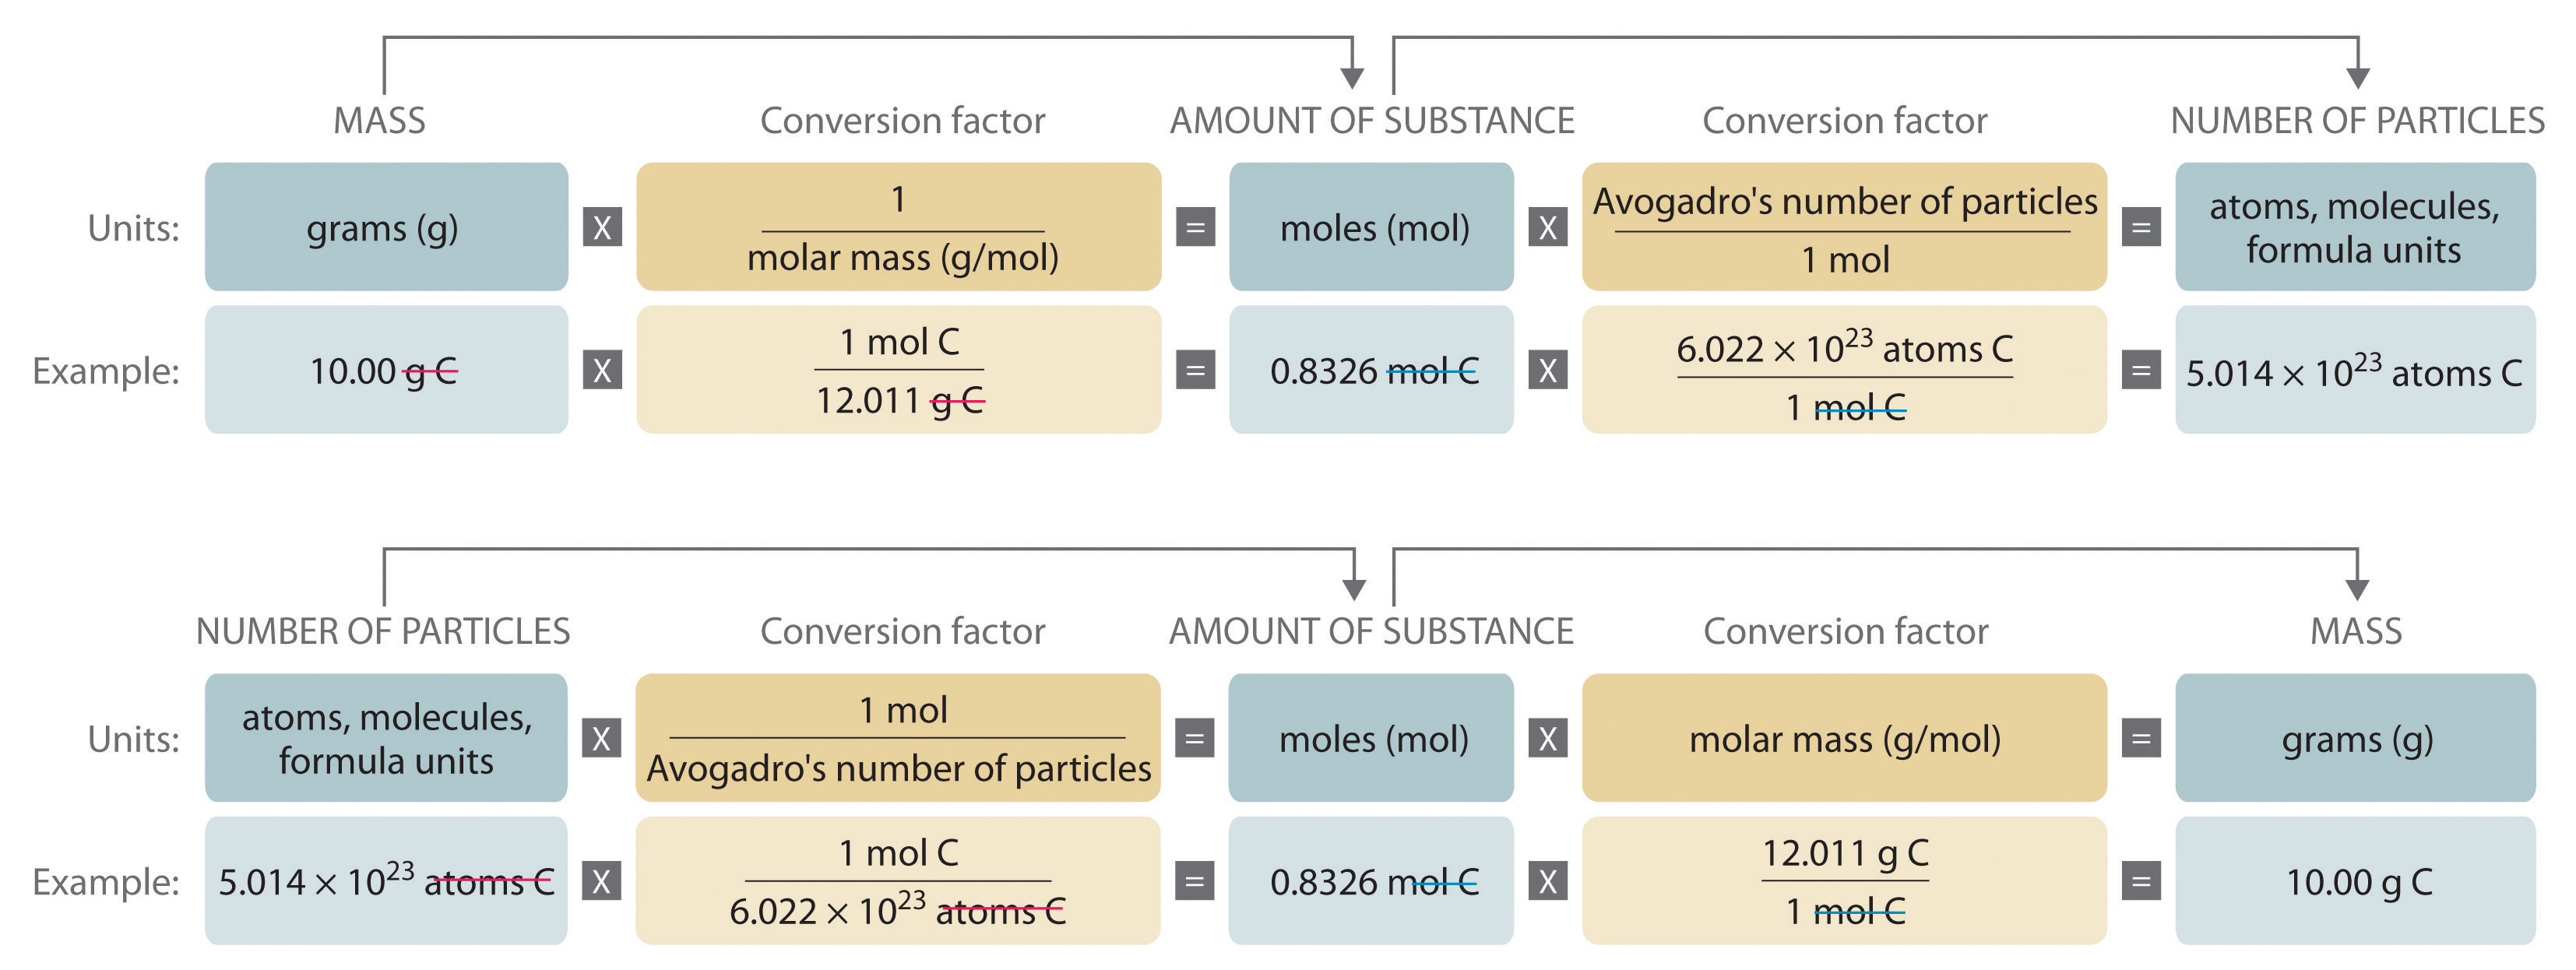 Flow chart of conversion from mass to number of particles and vice versa.